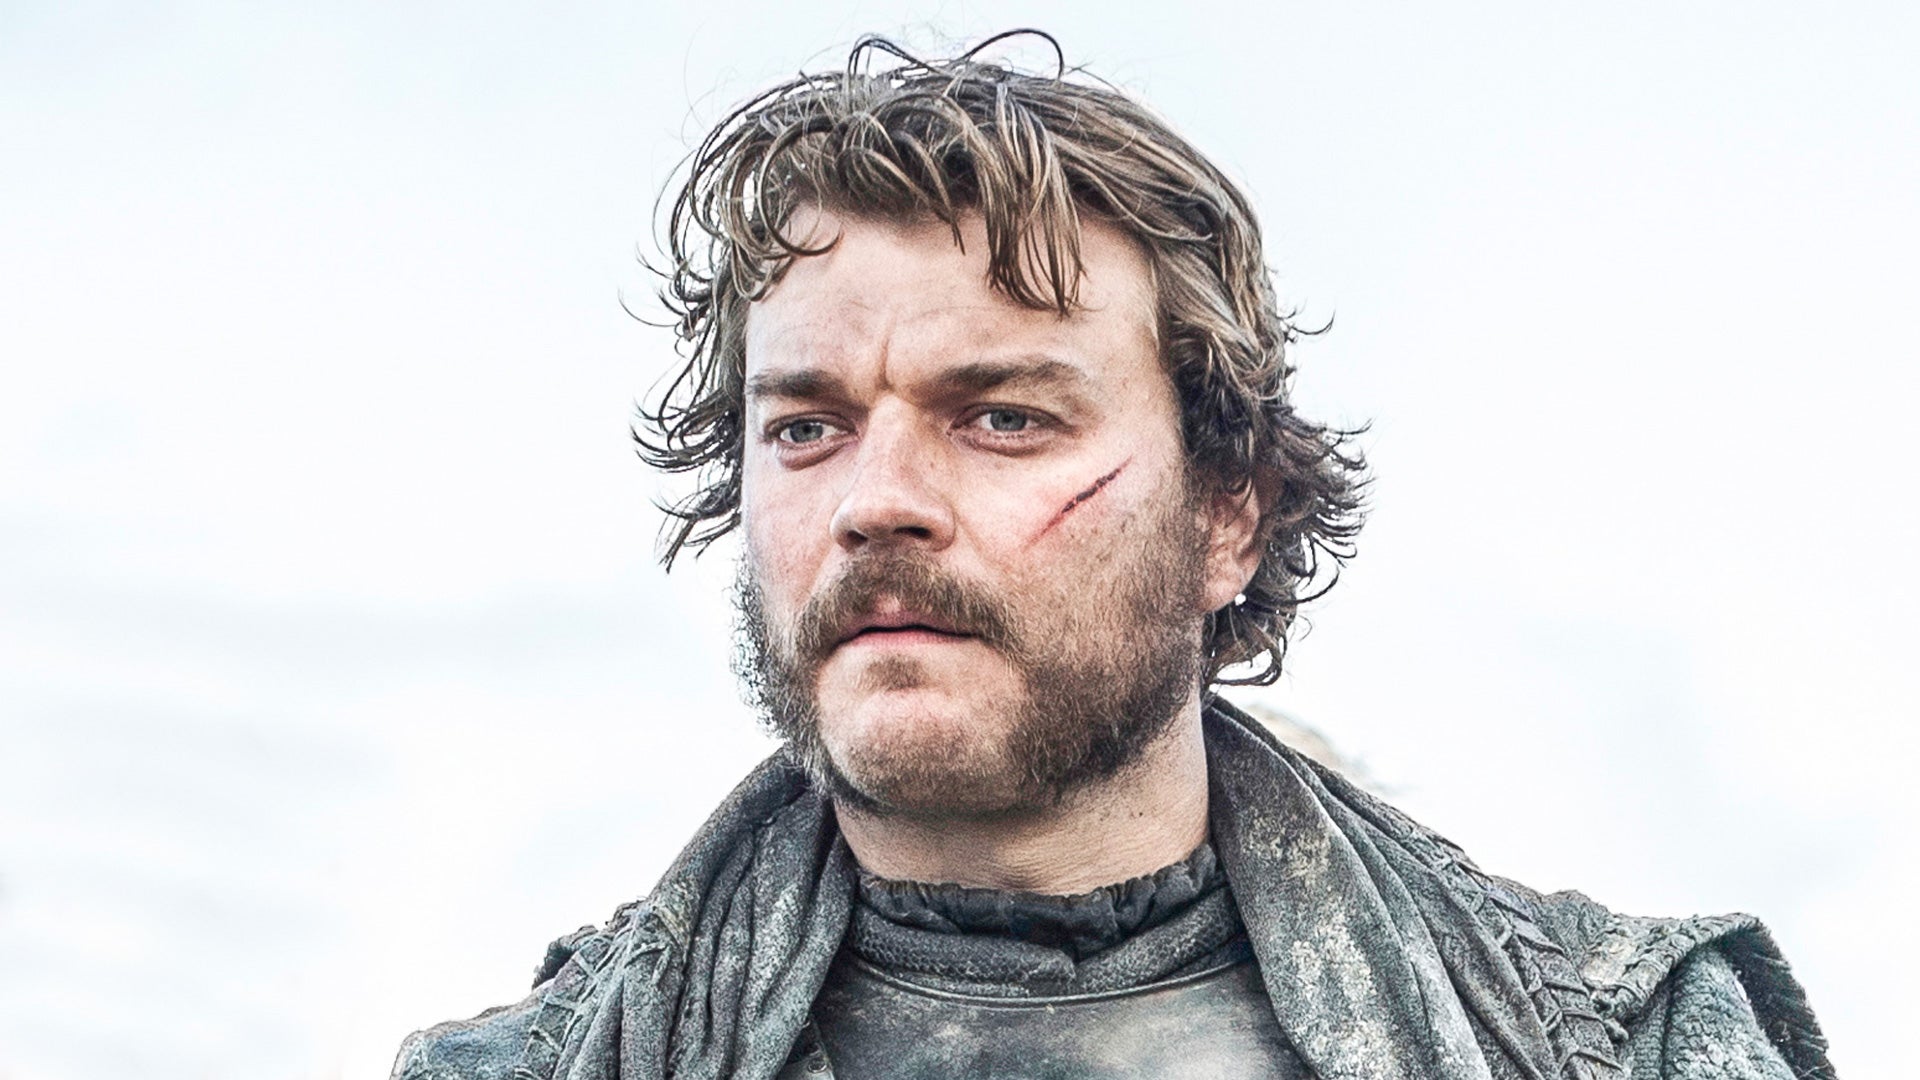 Euron Greyjoy, who features prominently in the chapter